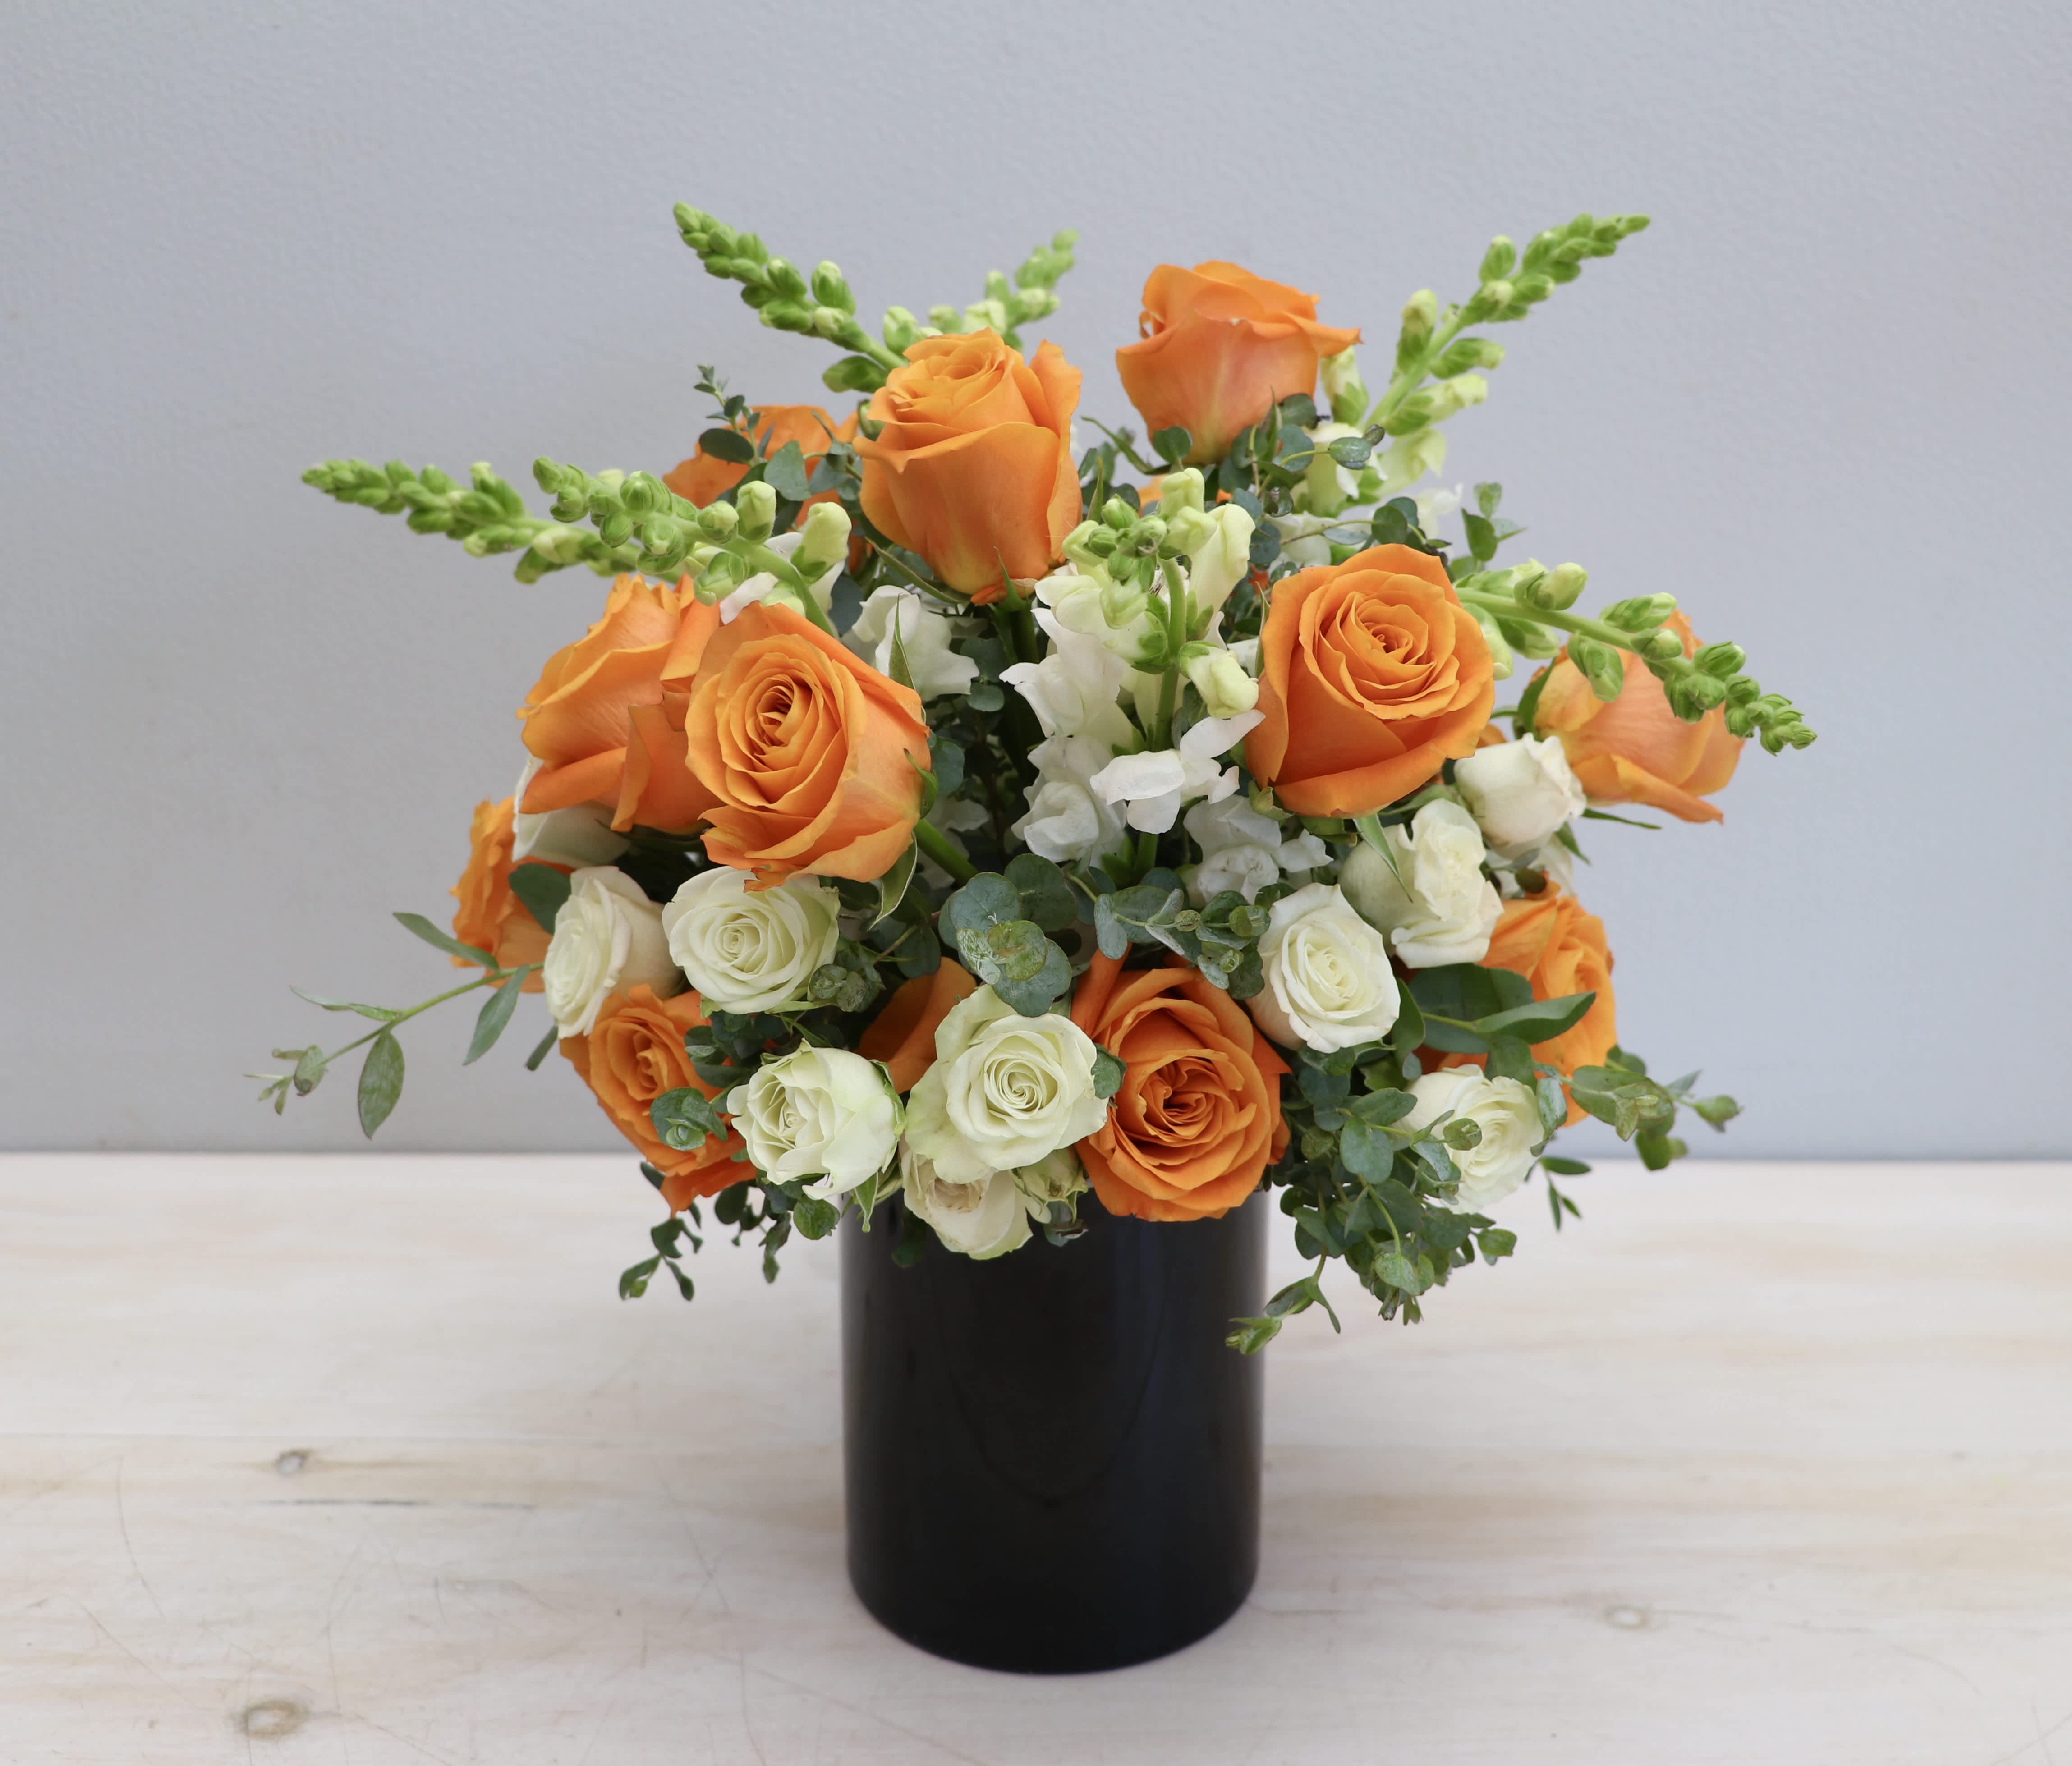 Orange Delight - Glendale Florist - This is a stunning floral arrangement featuring delicate orange roses, spray rose blooms, and lush greenery in shades of green. The combination of soft hues creates an upbeat and playful atmosphere, perfect for celebrating. At the standard size this arrangement stands at about 12-14 inches tall and wide. 